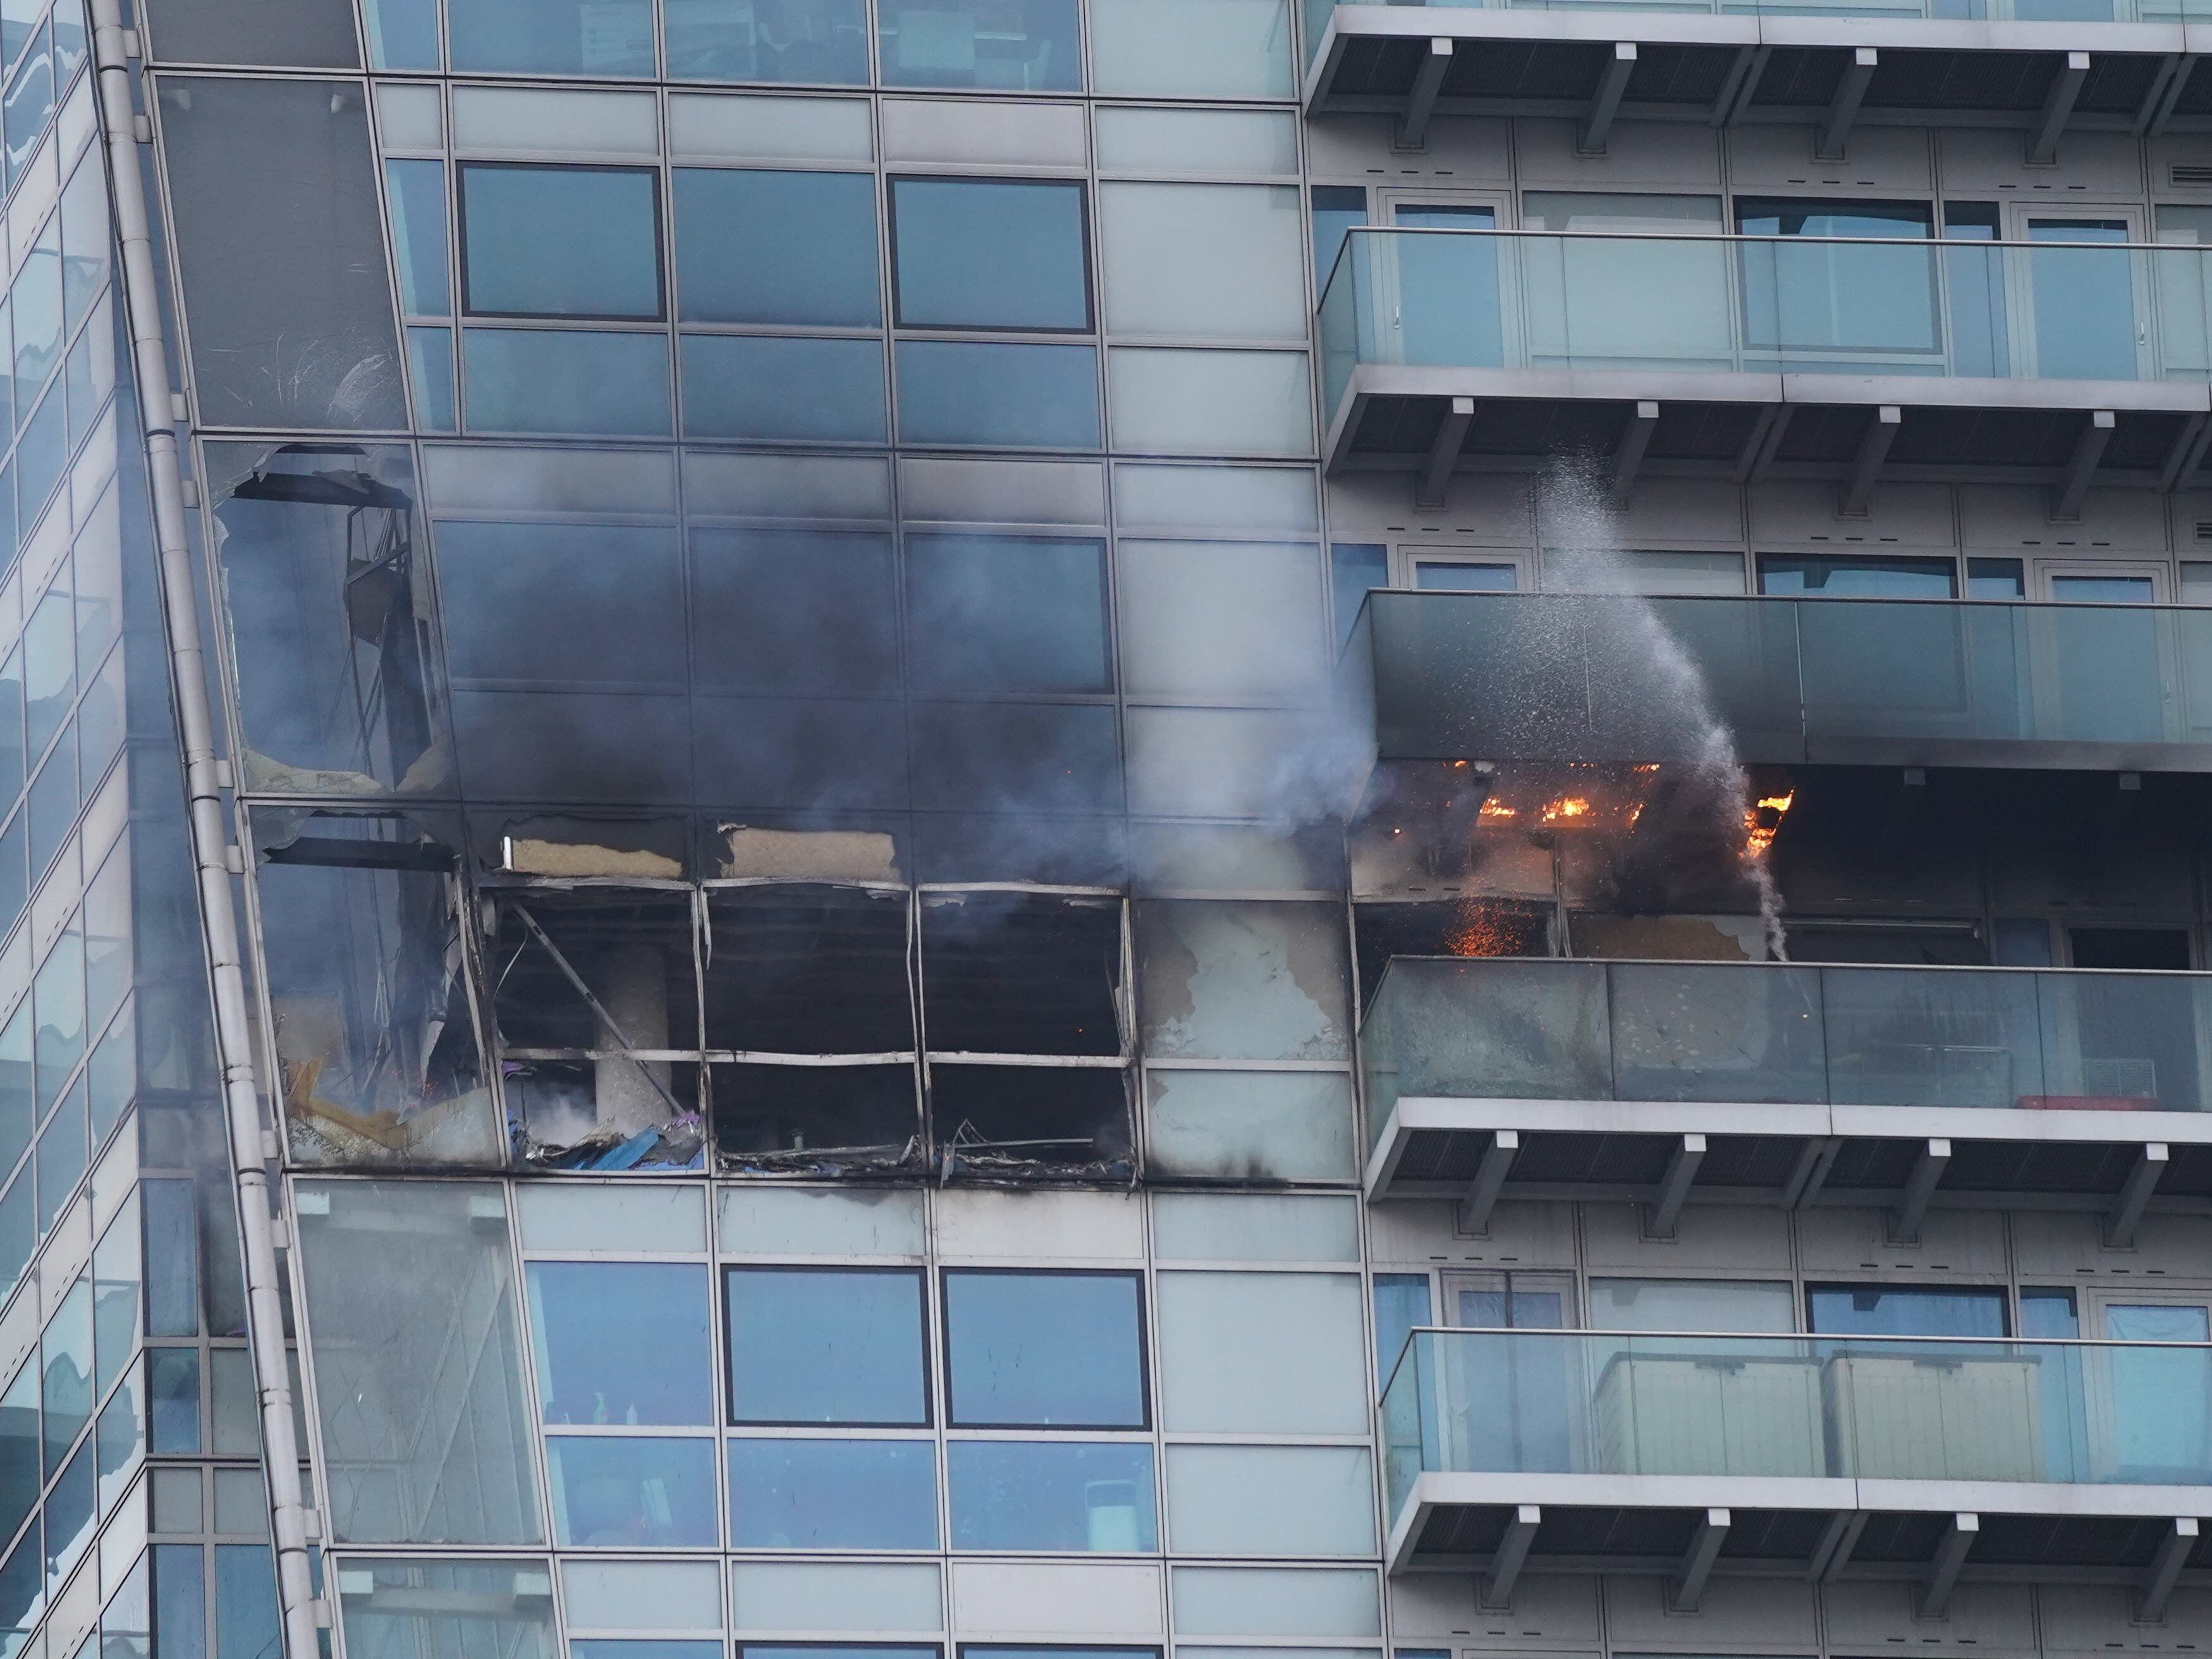 East London high-rise residents raised fire safety concerns before blaze